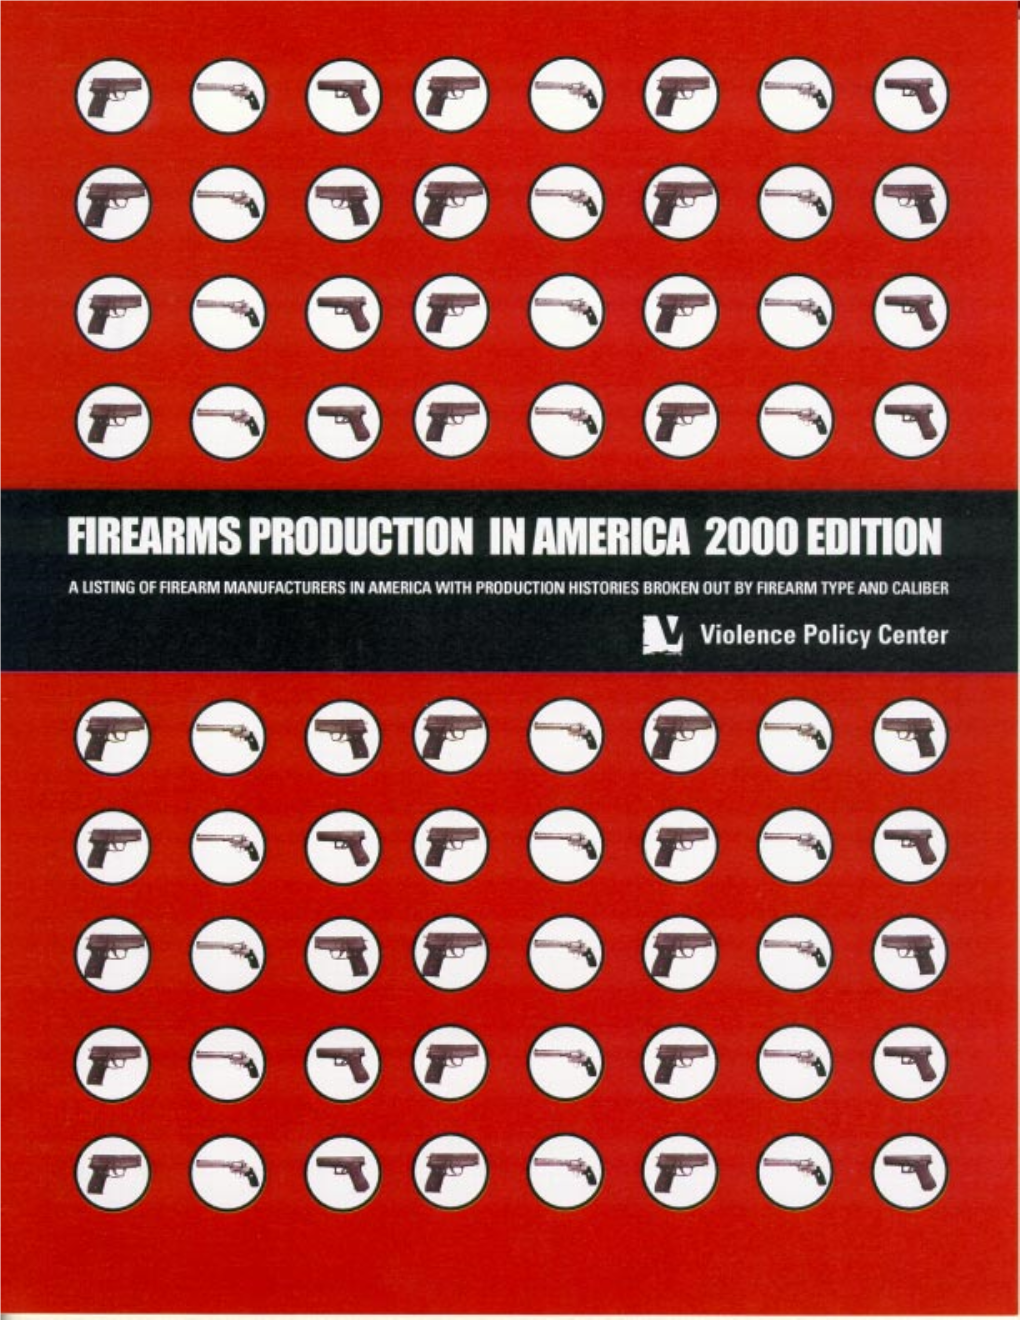 Firearms Production in America Was Provided by Brinda Adhikari, Marty Langley, and Rachel Weston